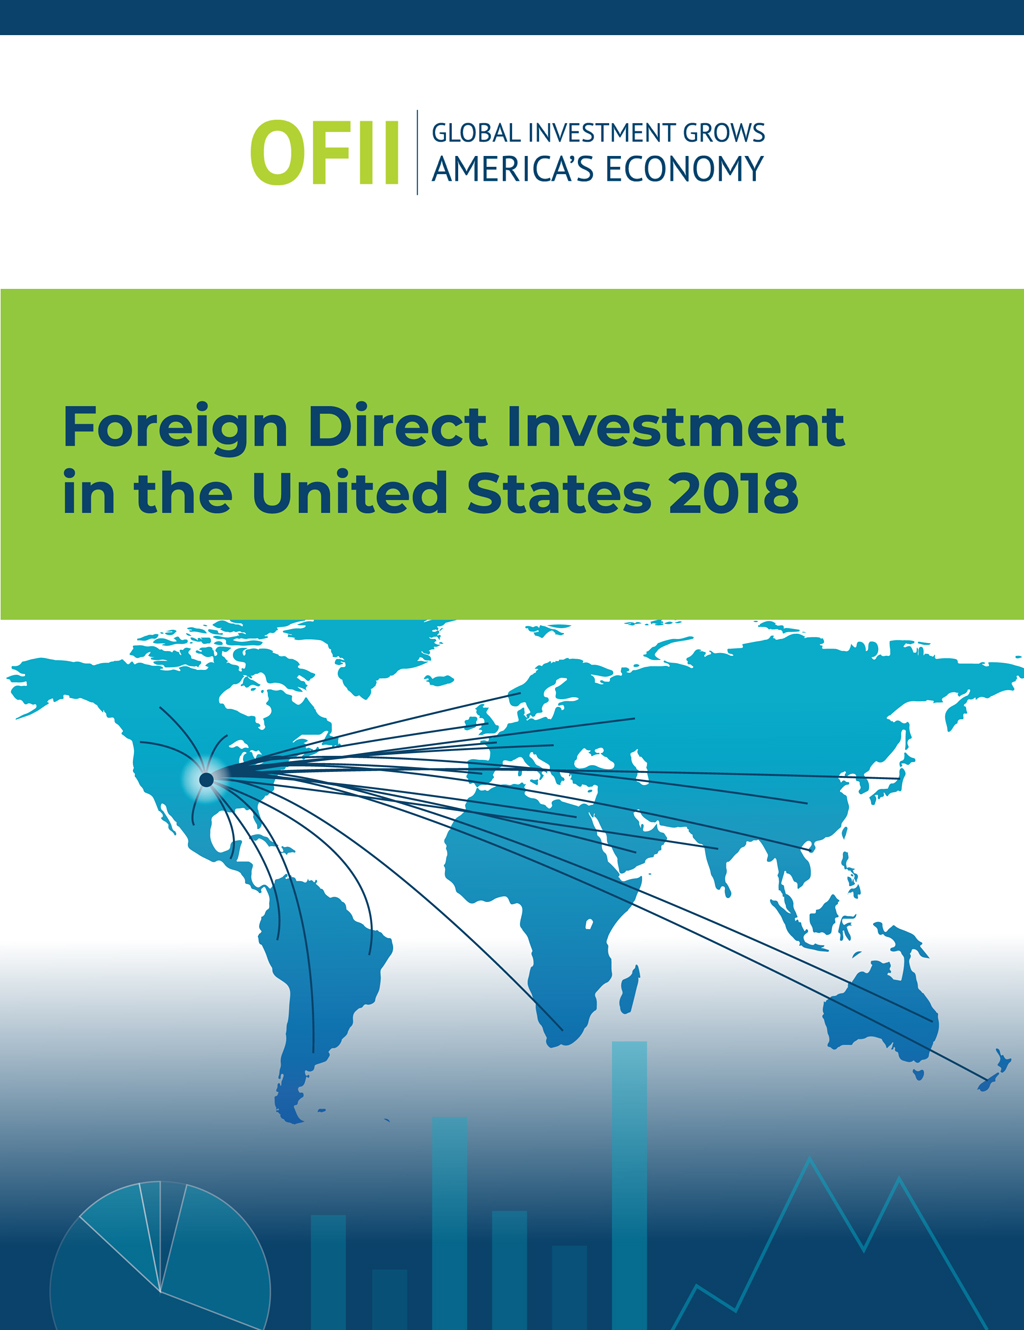 Cover of a report containing statistics regarding foreign investment in the United States